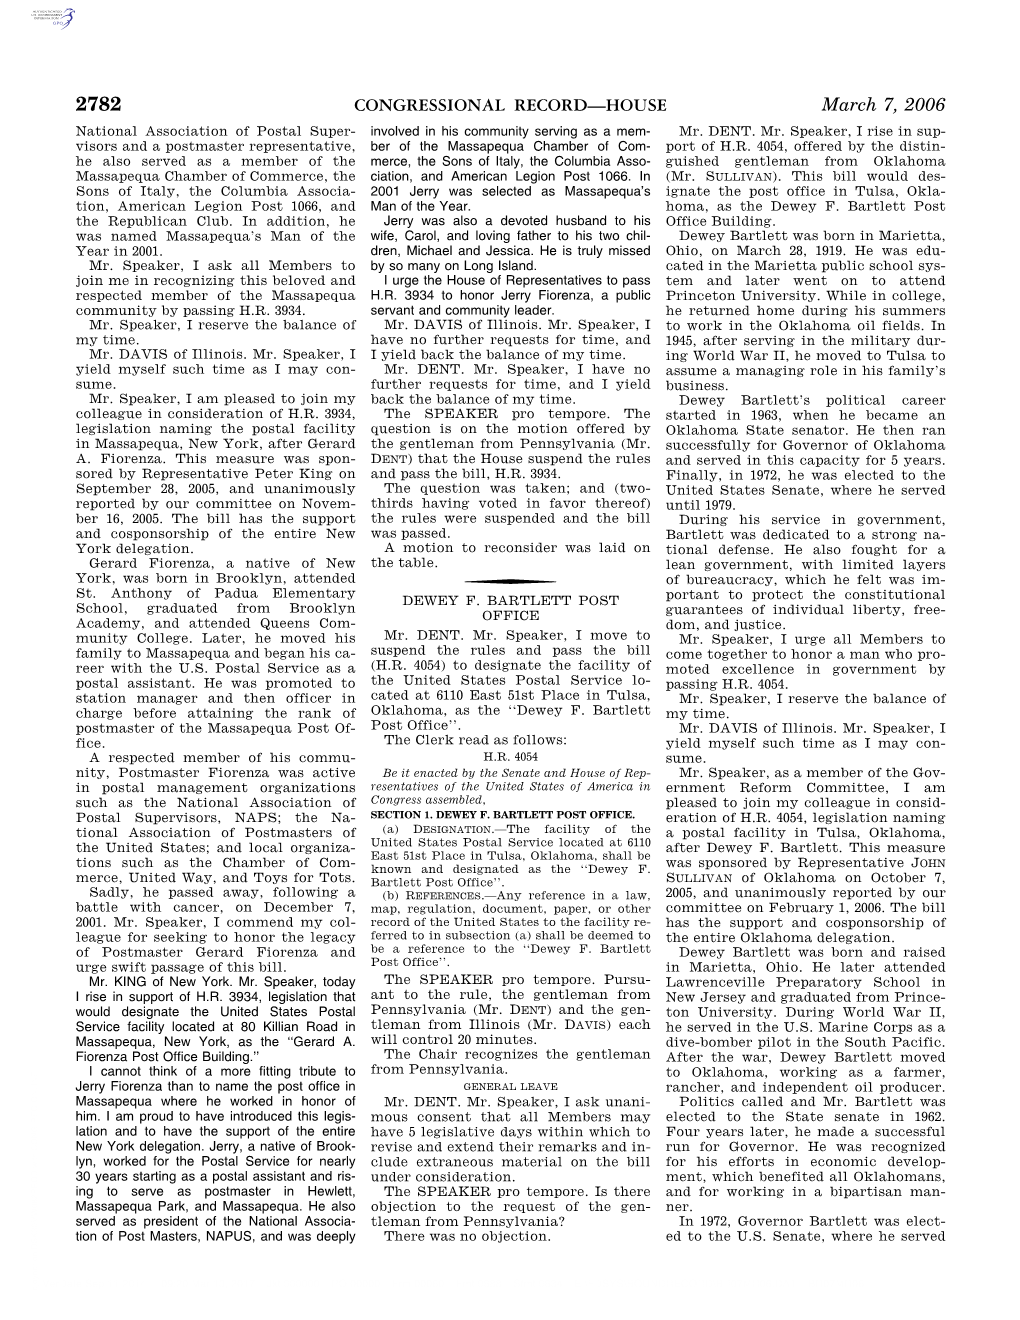 CONGRESSIONAL RECORD—HOUSE March 7, 2006 National Association of Postal Super- Involved in His Community Serving As a Mem- Mr